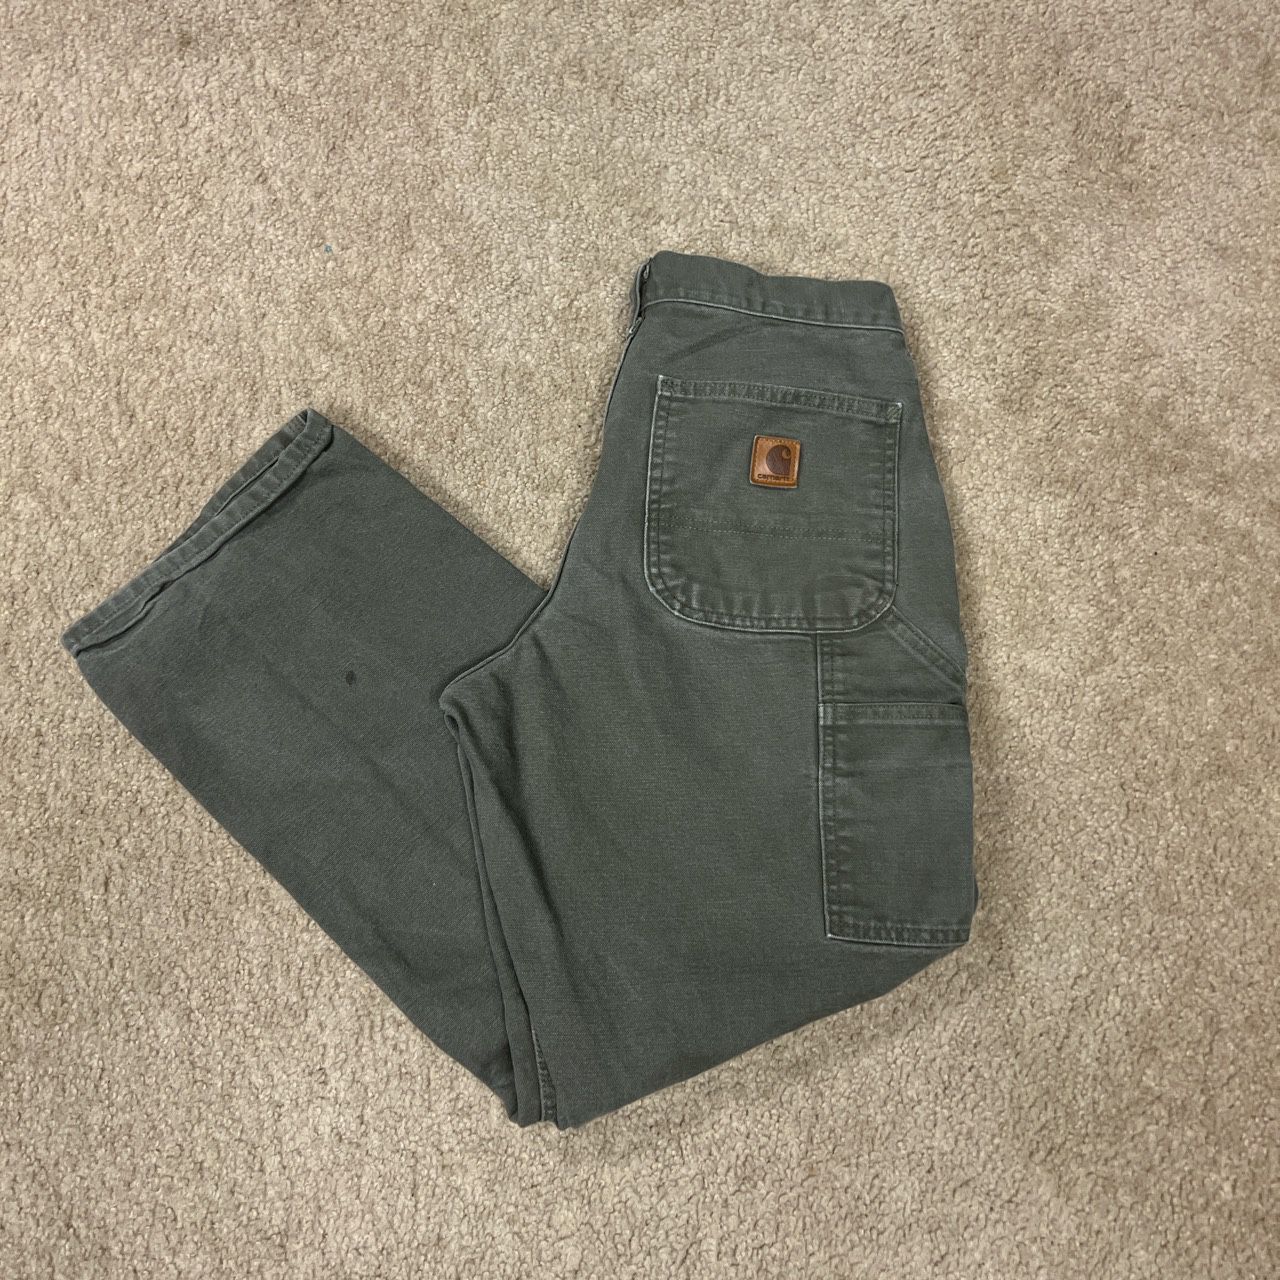 Vintage Carhartt Olive Green Loose Original Fit Work Pants, Size Men 31x30  for Sale in Lincoln, CA - OfferUp